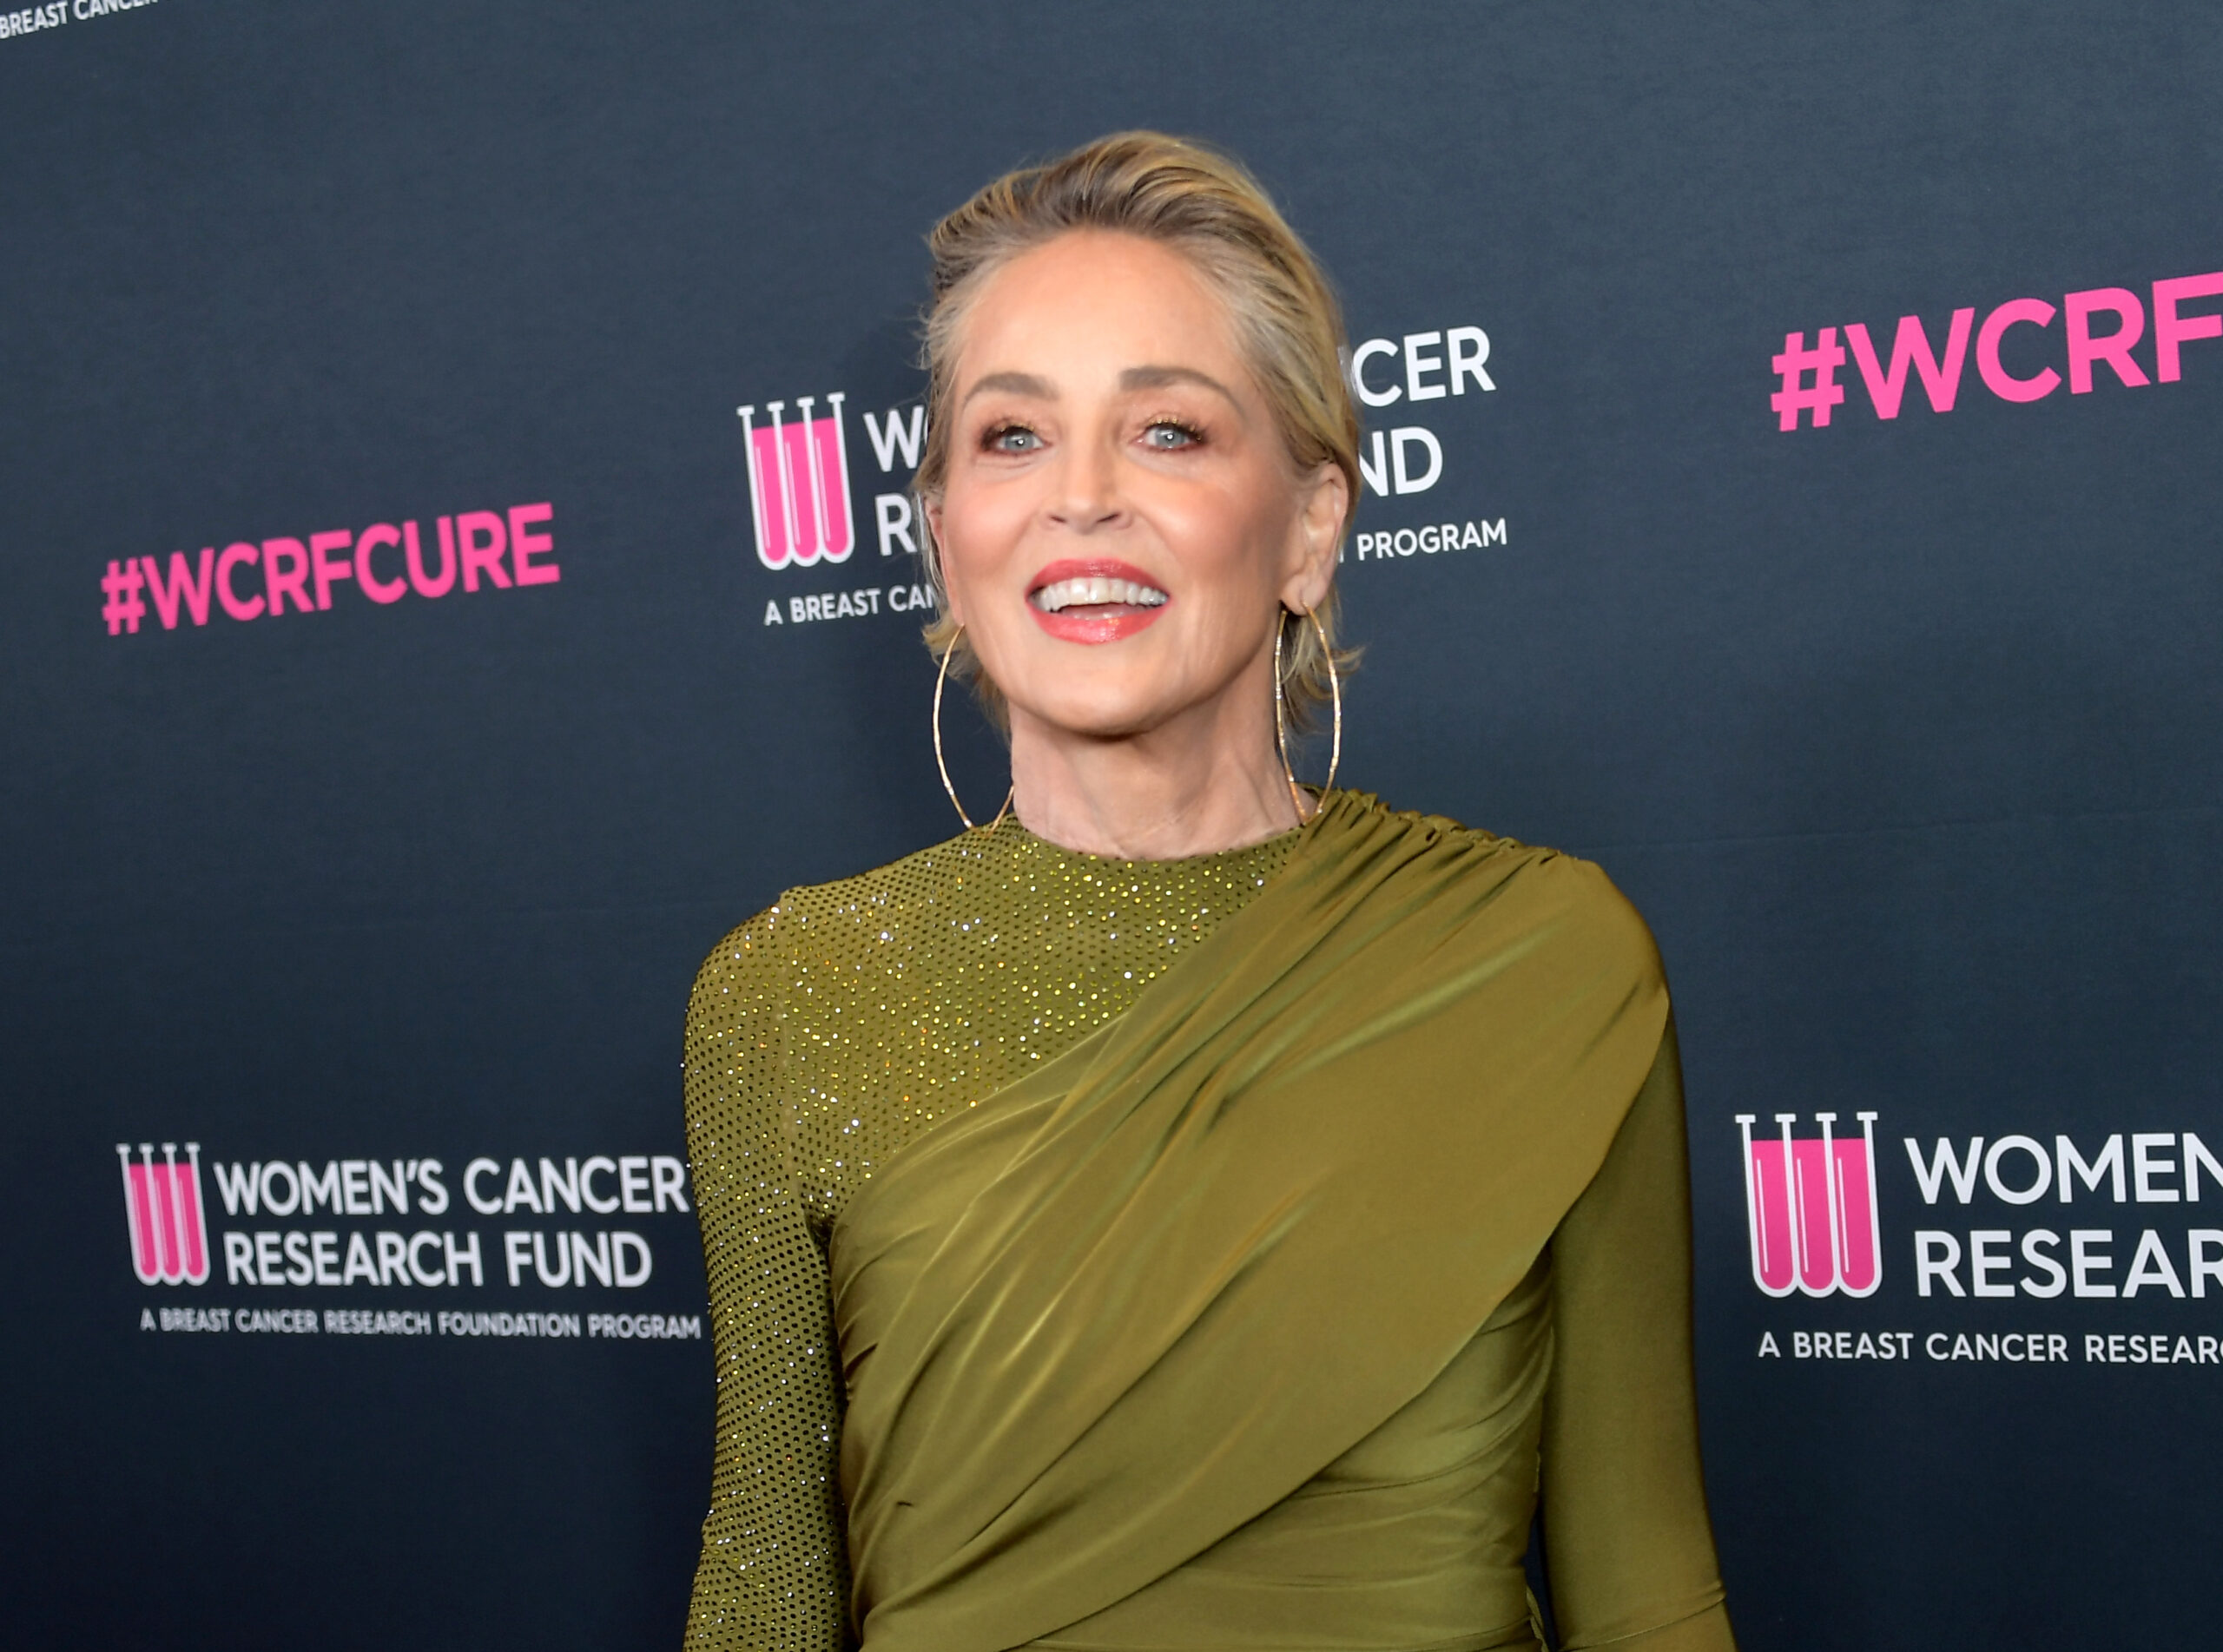 Sharon Stone Delivers Emotional Speech, Says ‘I Lost Half My Money To This Banking Thing’